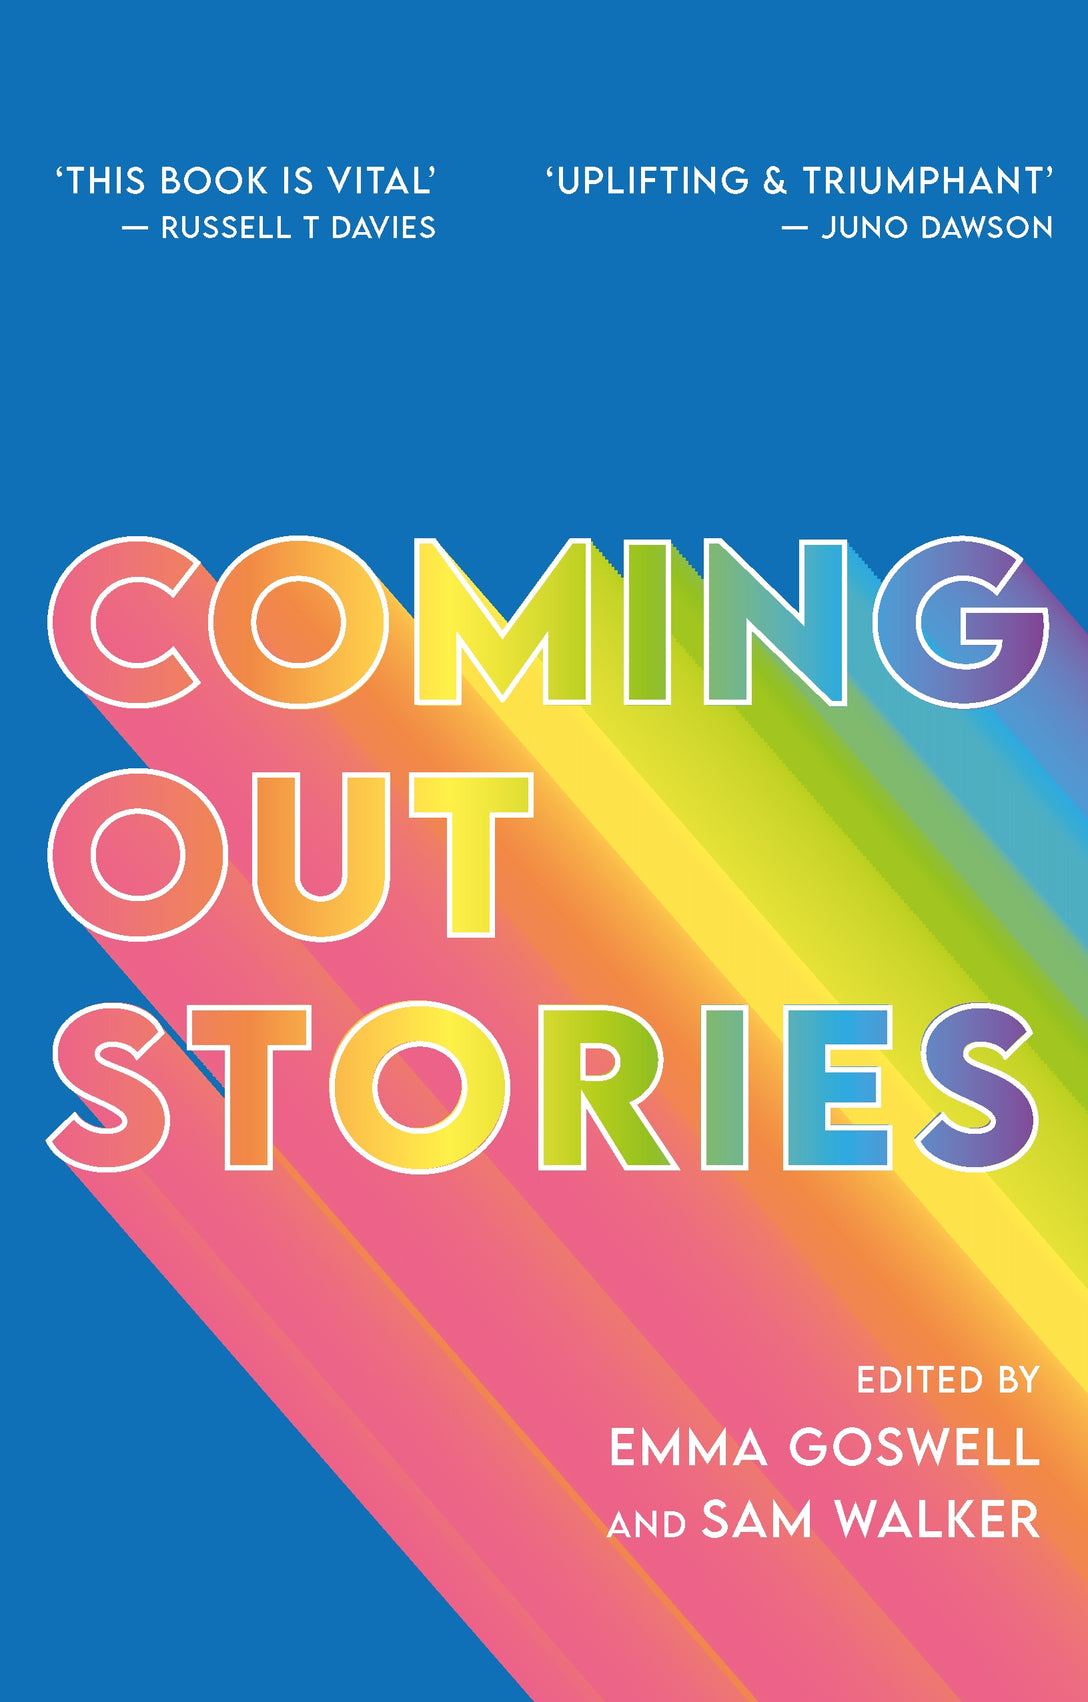 Coming Out Stories by Sam Walker, Emma Goswell, Tim Sigsworth MBE, No Author Listed